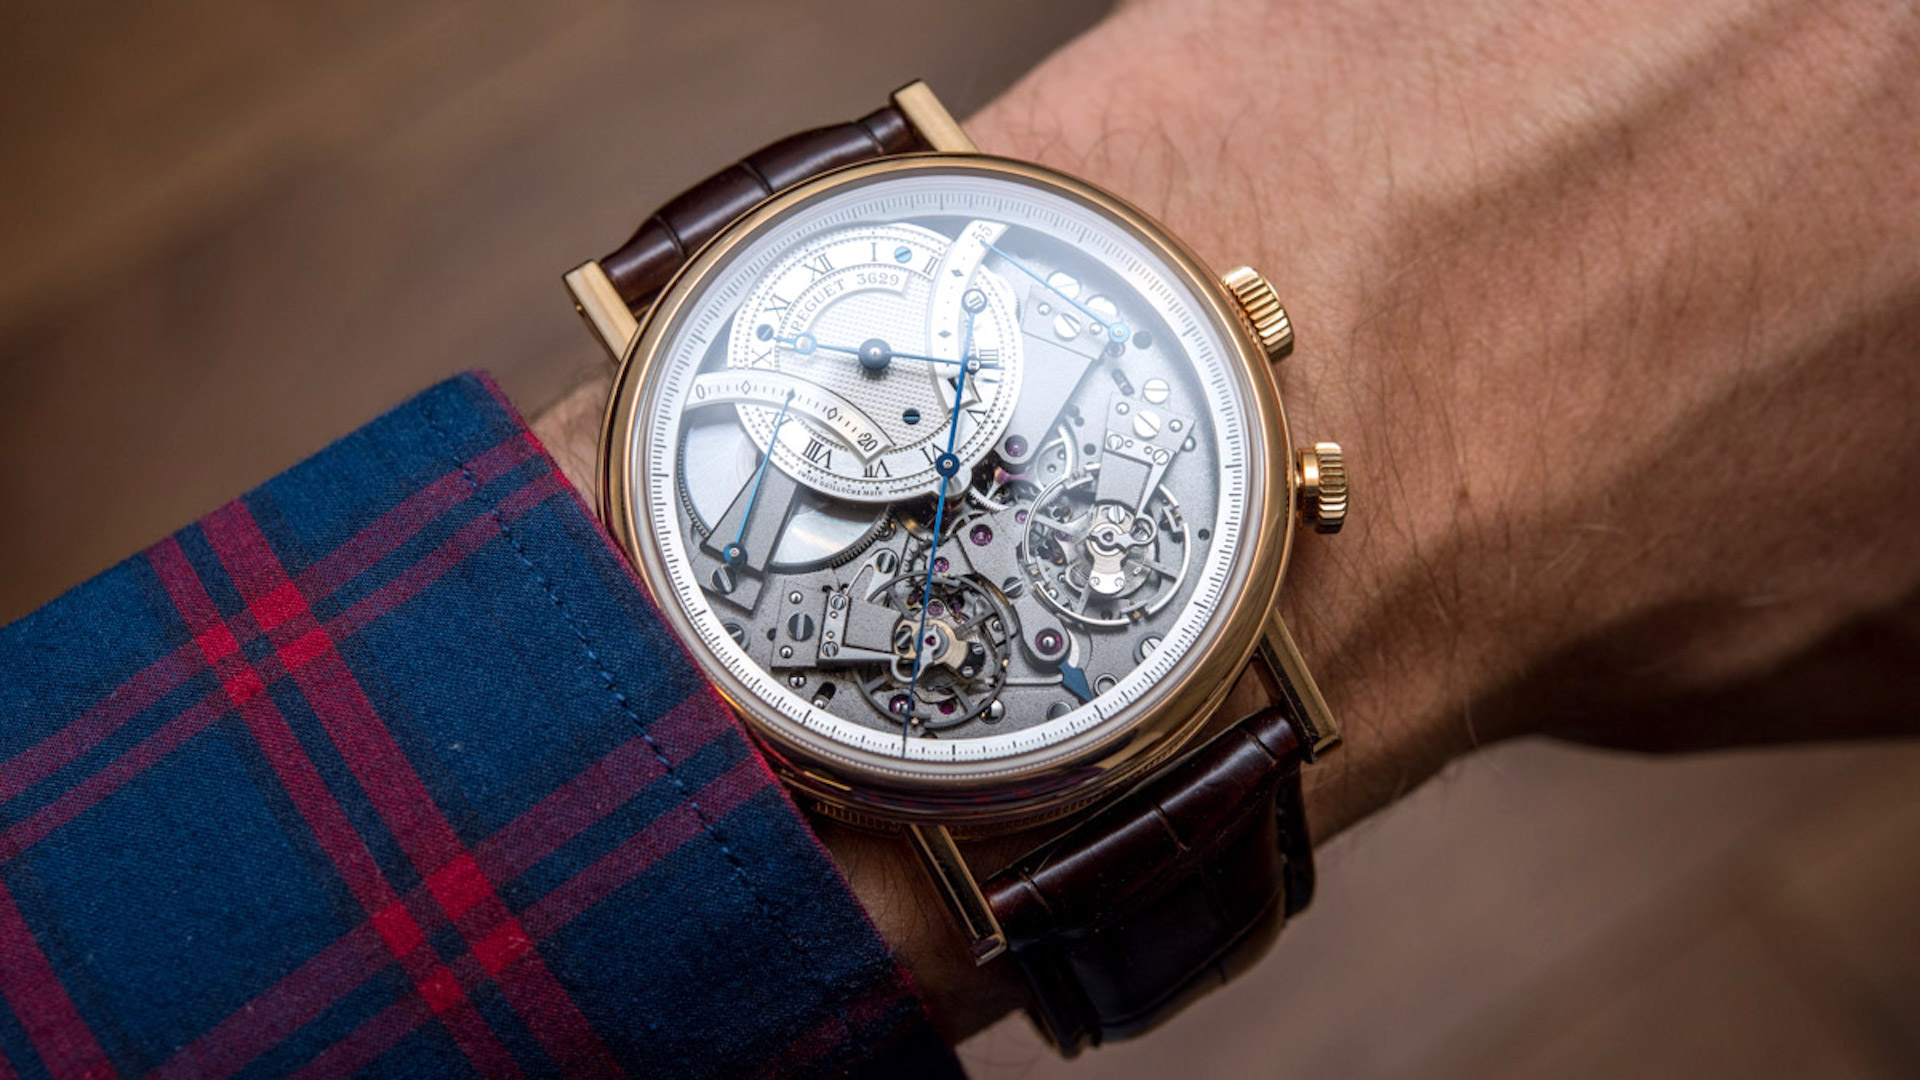 Breguet Tradition Chronographe Ind Pendant Watch Hands On